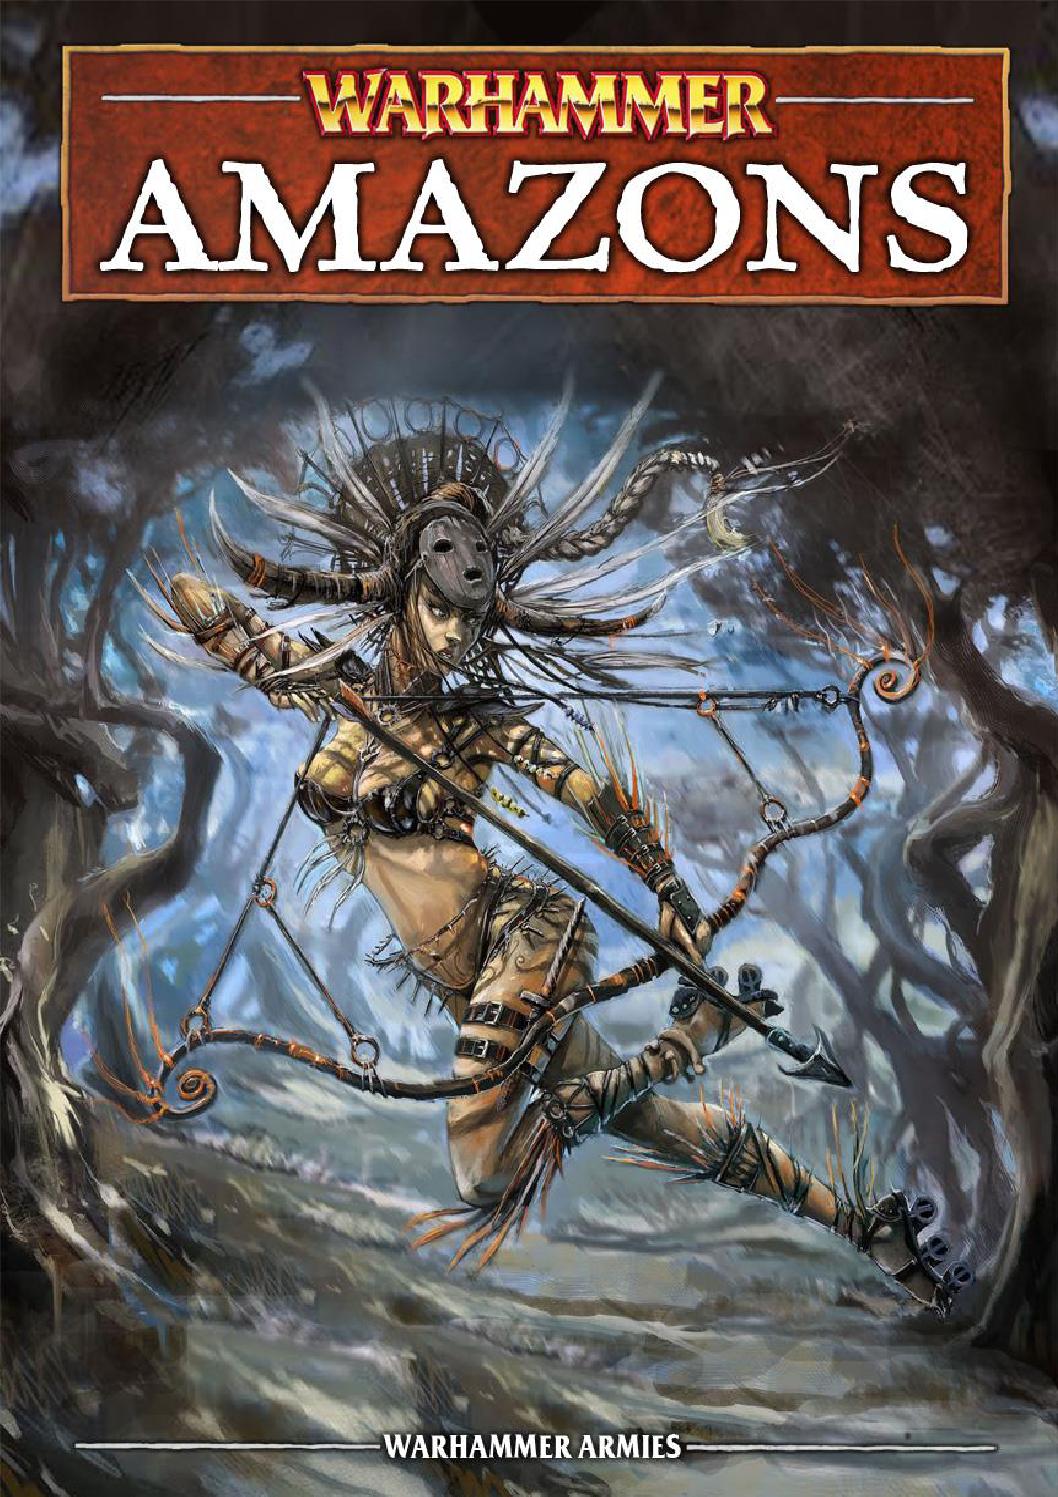 The Amazons, mysterious warrior women of the Lustrian jungles.